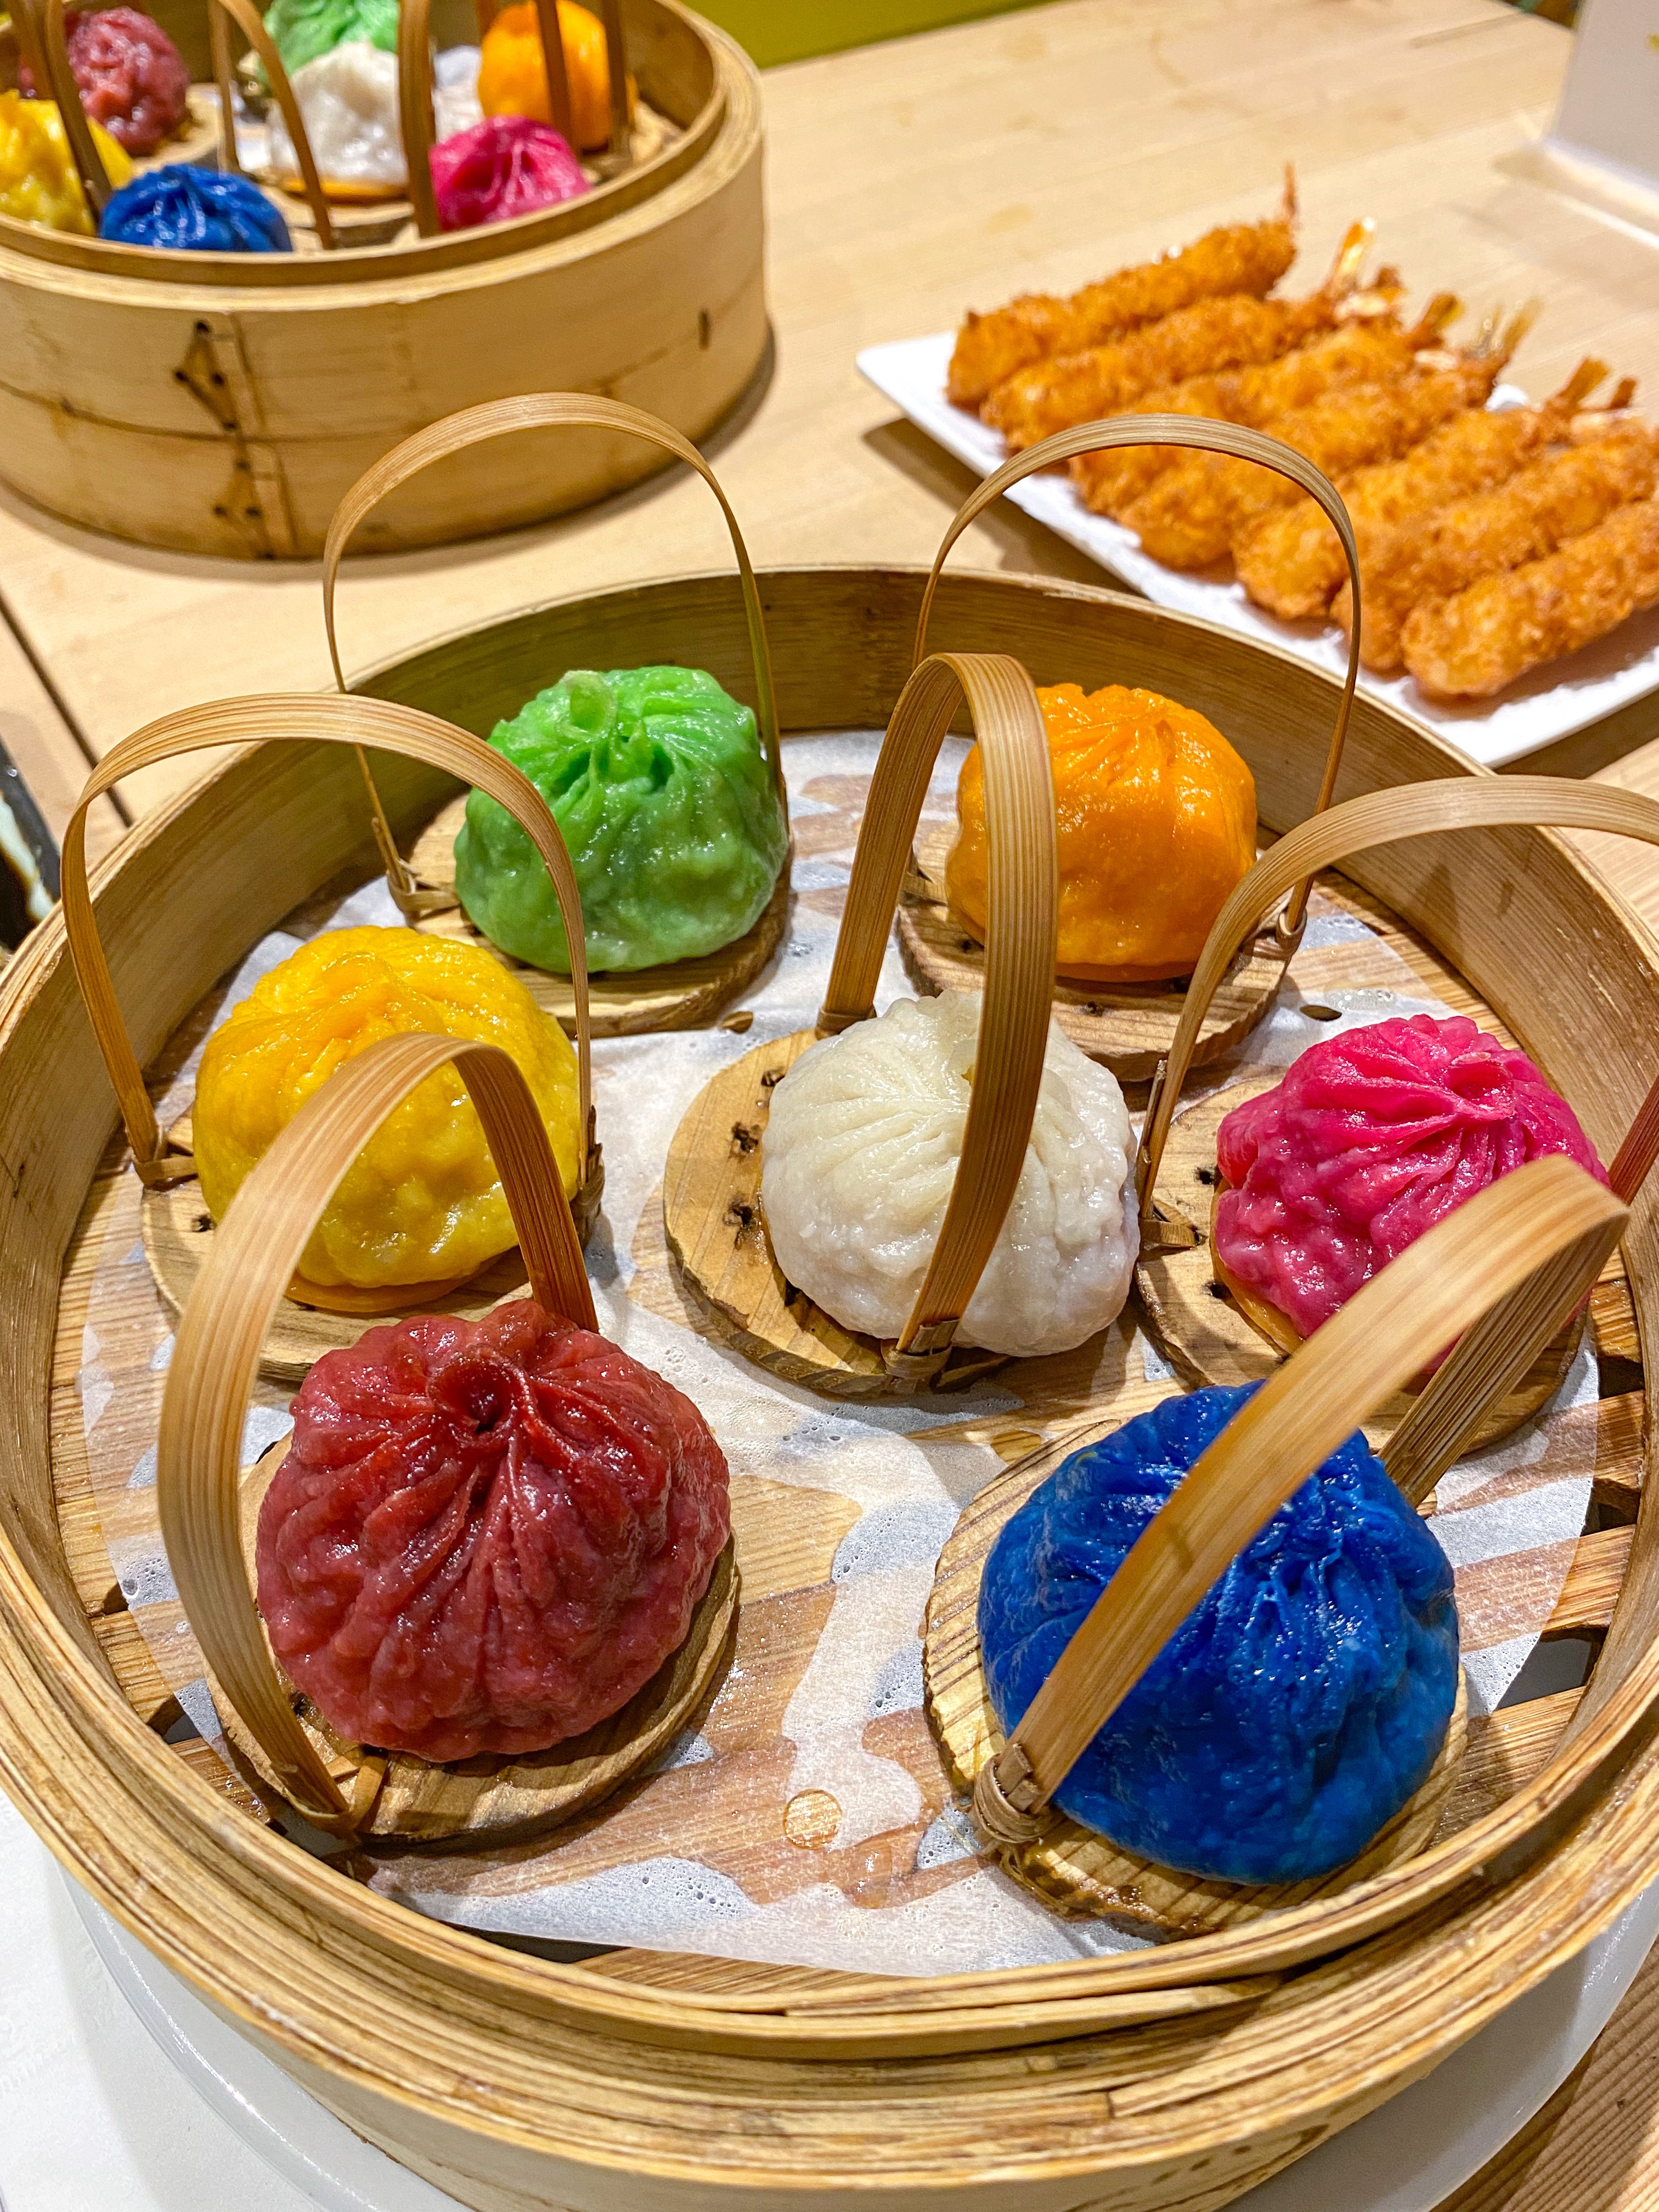 Jingle Bao Vancouver rainbow xlb The Signature Magnificent Seven ($13.00). It features 7 soup dumplings in the following flavours: classic, spicy, shrimp, spinach, mushroom, garlic and curry.